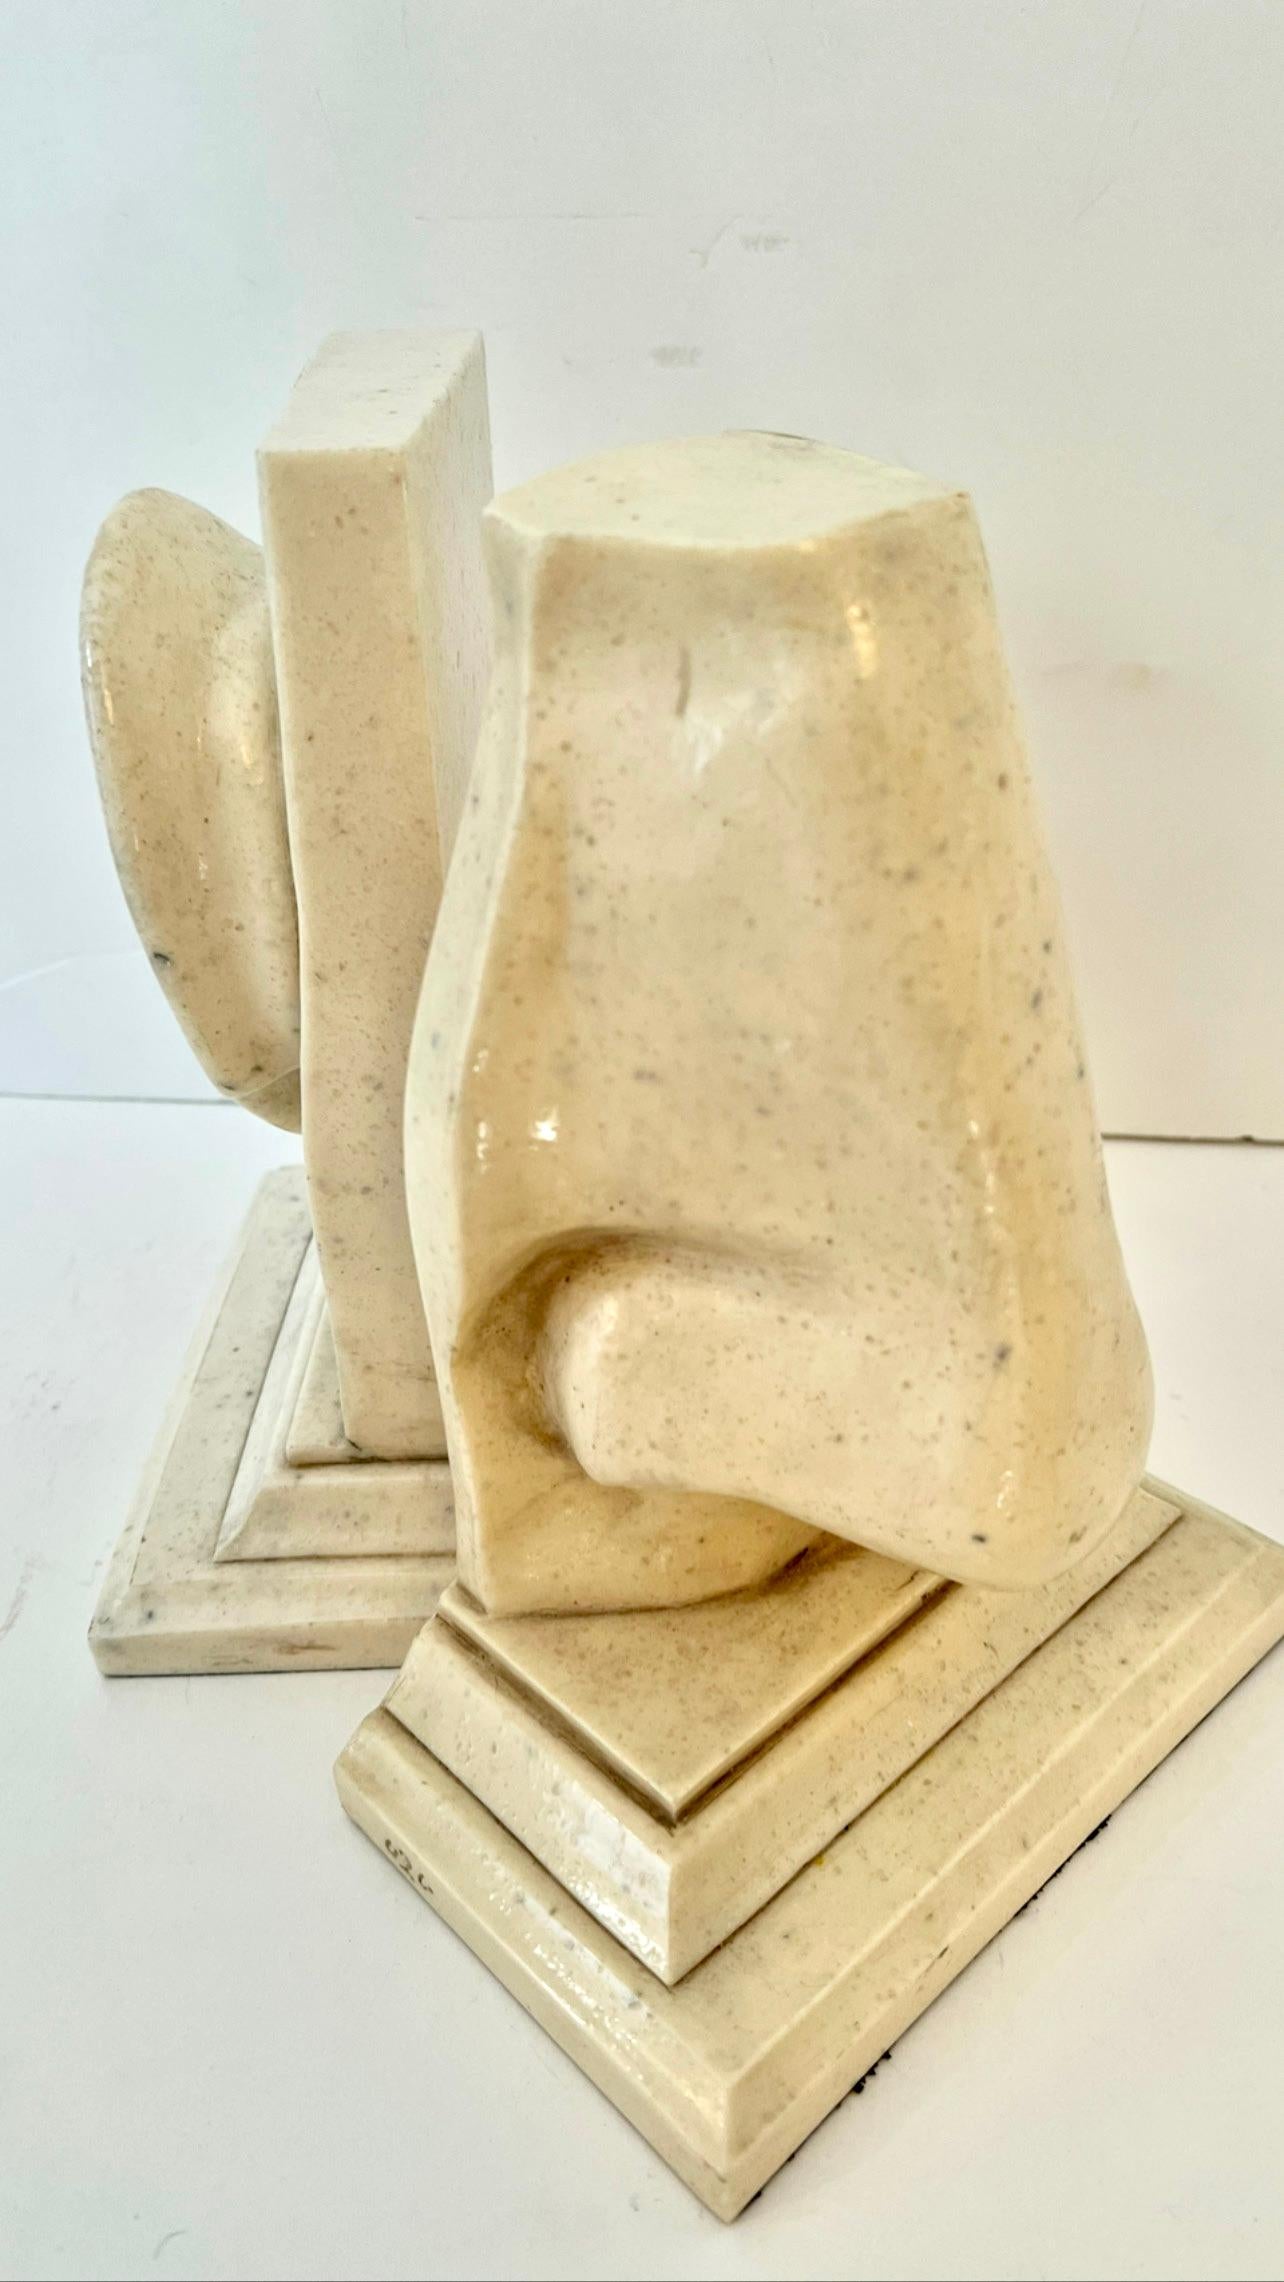 Pair of C2C Designs, a Resin Based Sculptural Ear and Nose Bookend Set For Sale 5